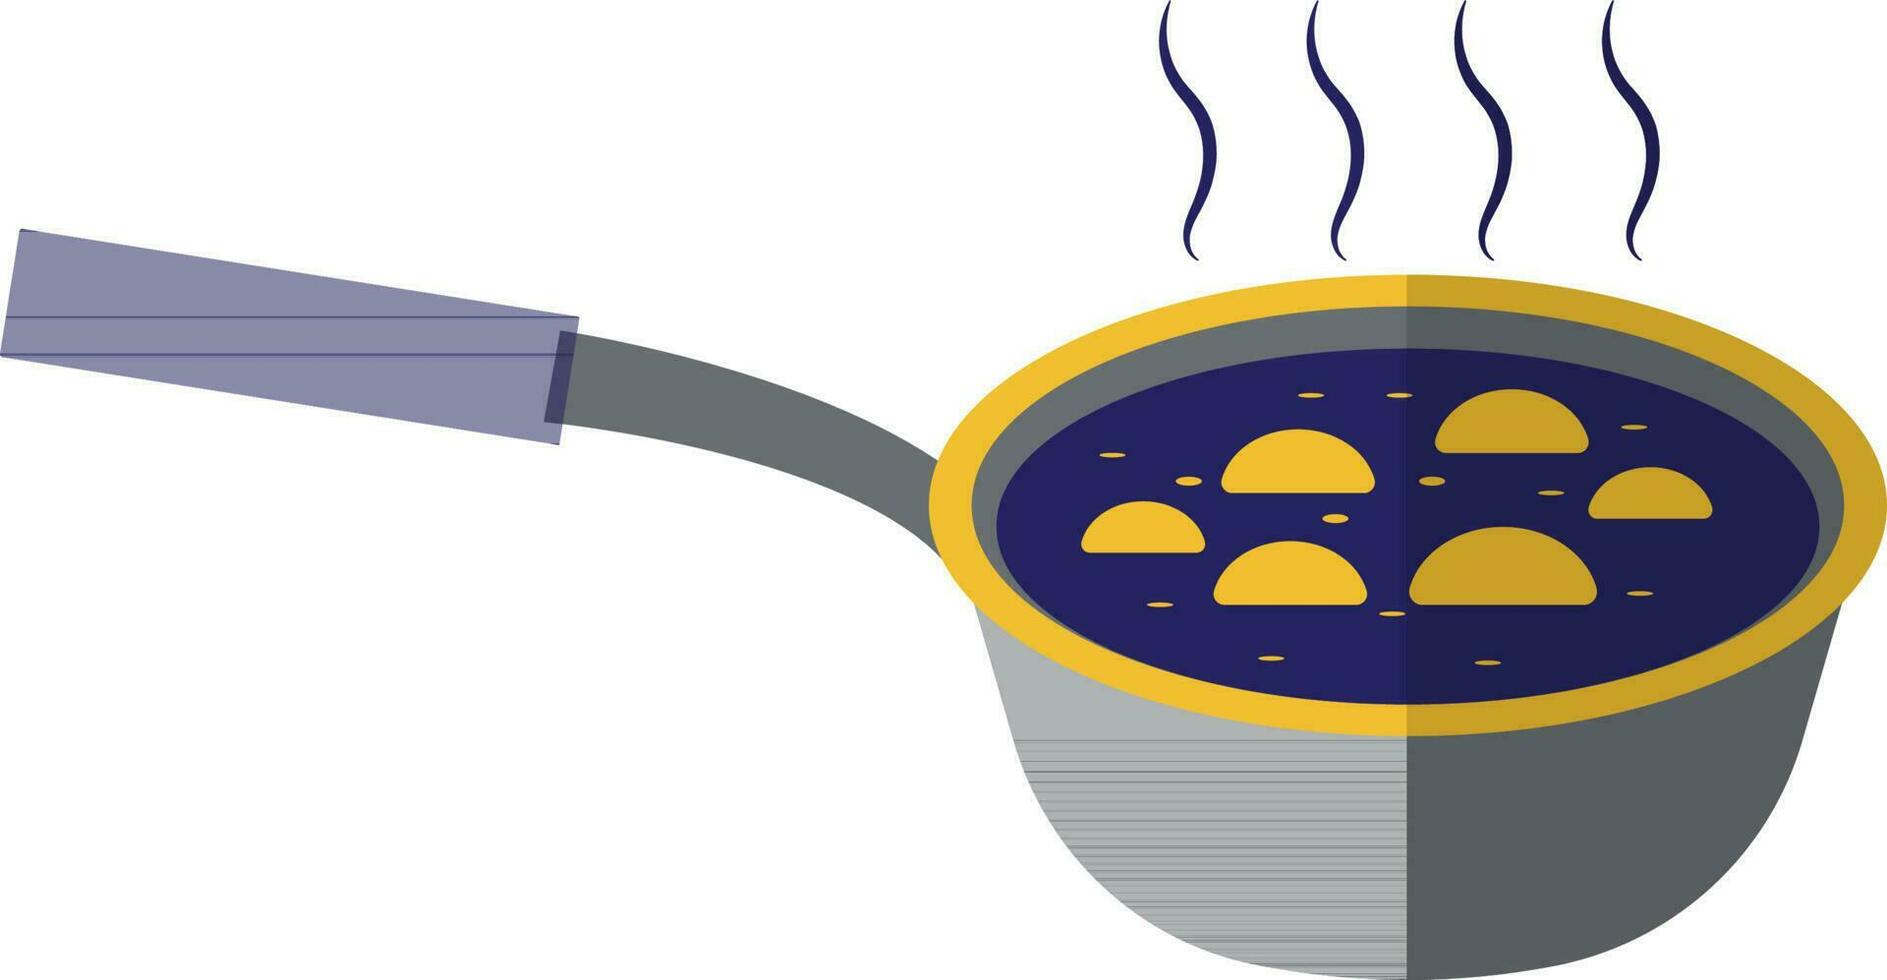 Hot frying pan in flat style. vector